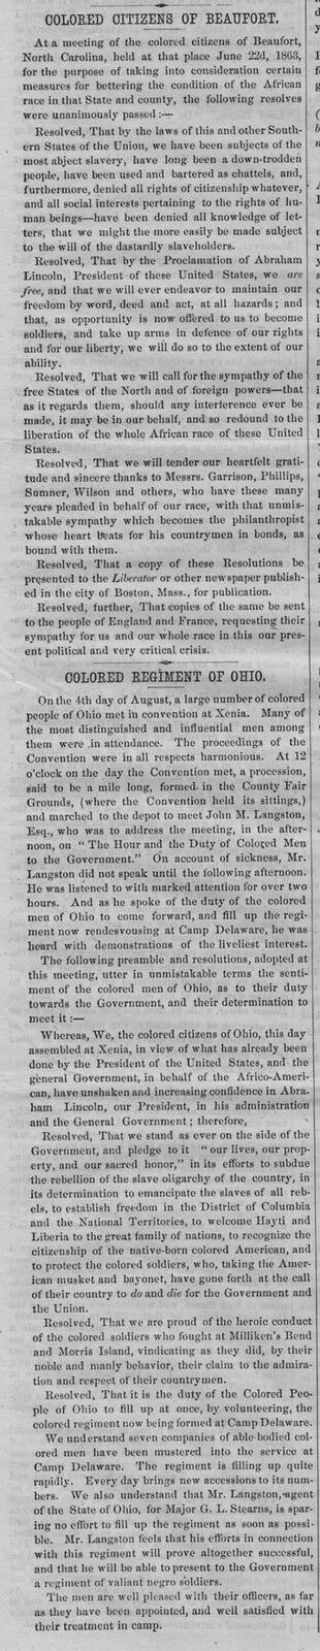 NEGRO SOLDIERS IN THE CIVIL WAR SLAVES COLORED CITIZENS ANTI SLAVERY NEWSPAPER 6